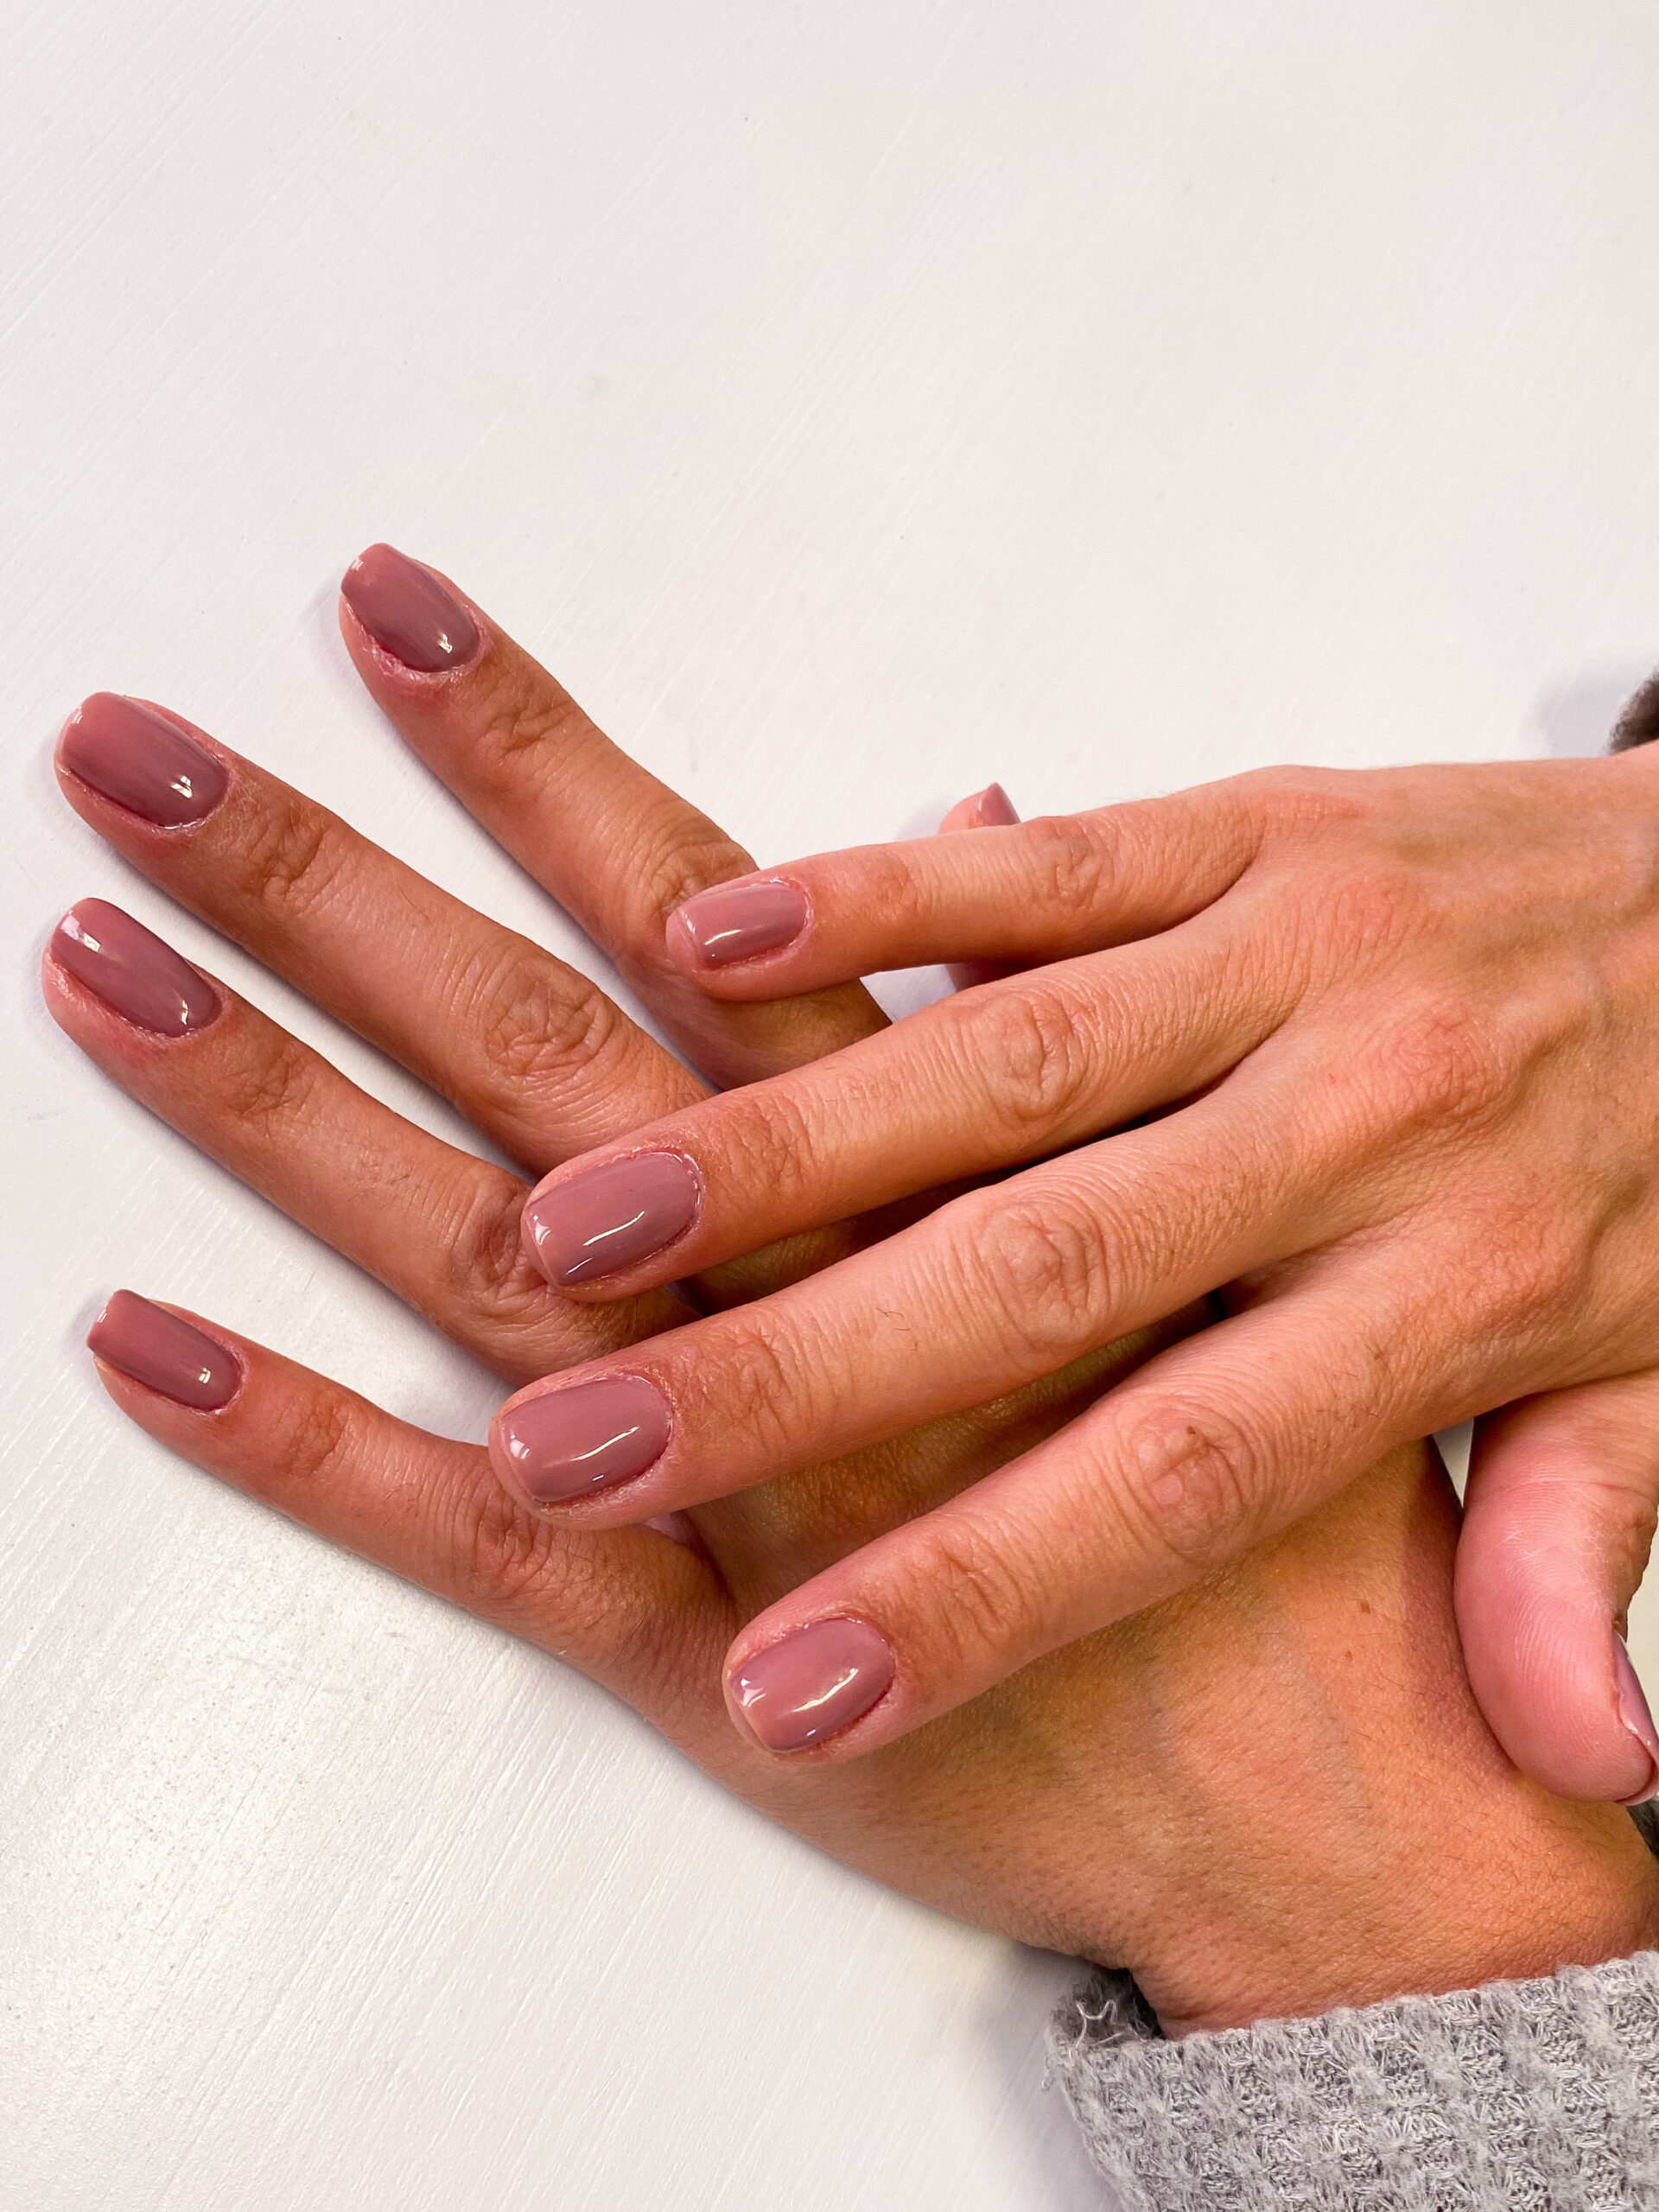 HOW TO: DIY Gel Manicure AT HOME